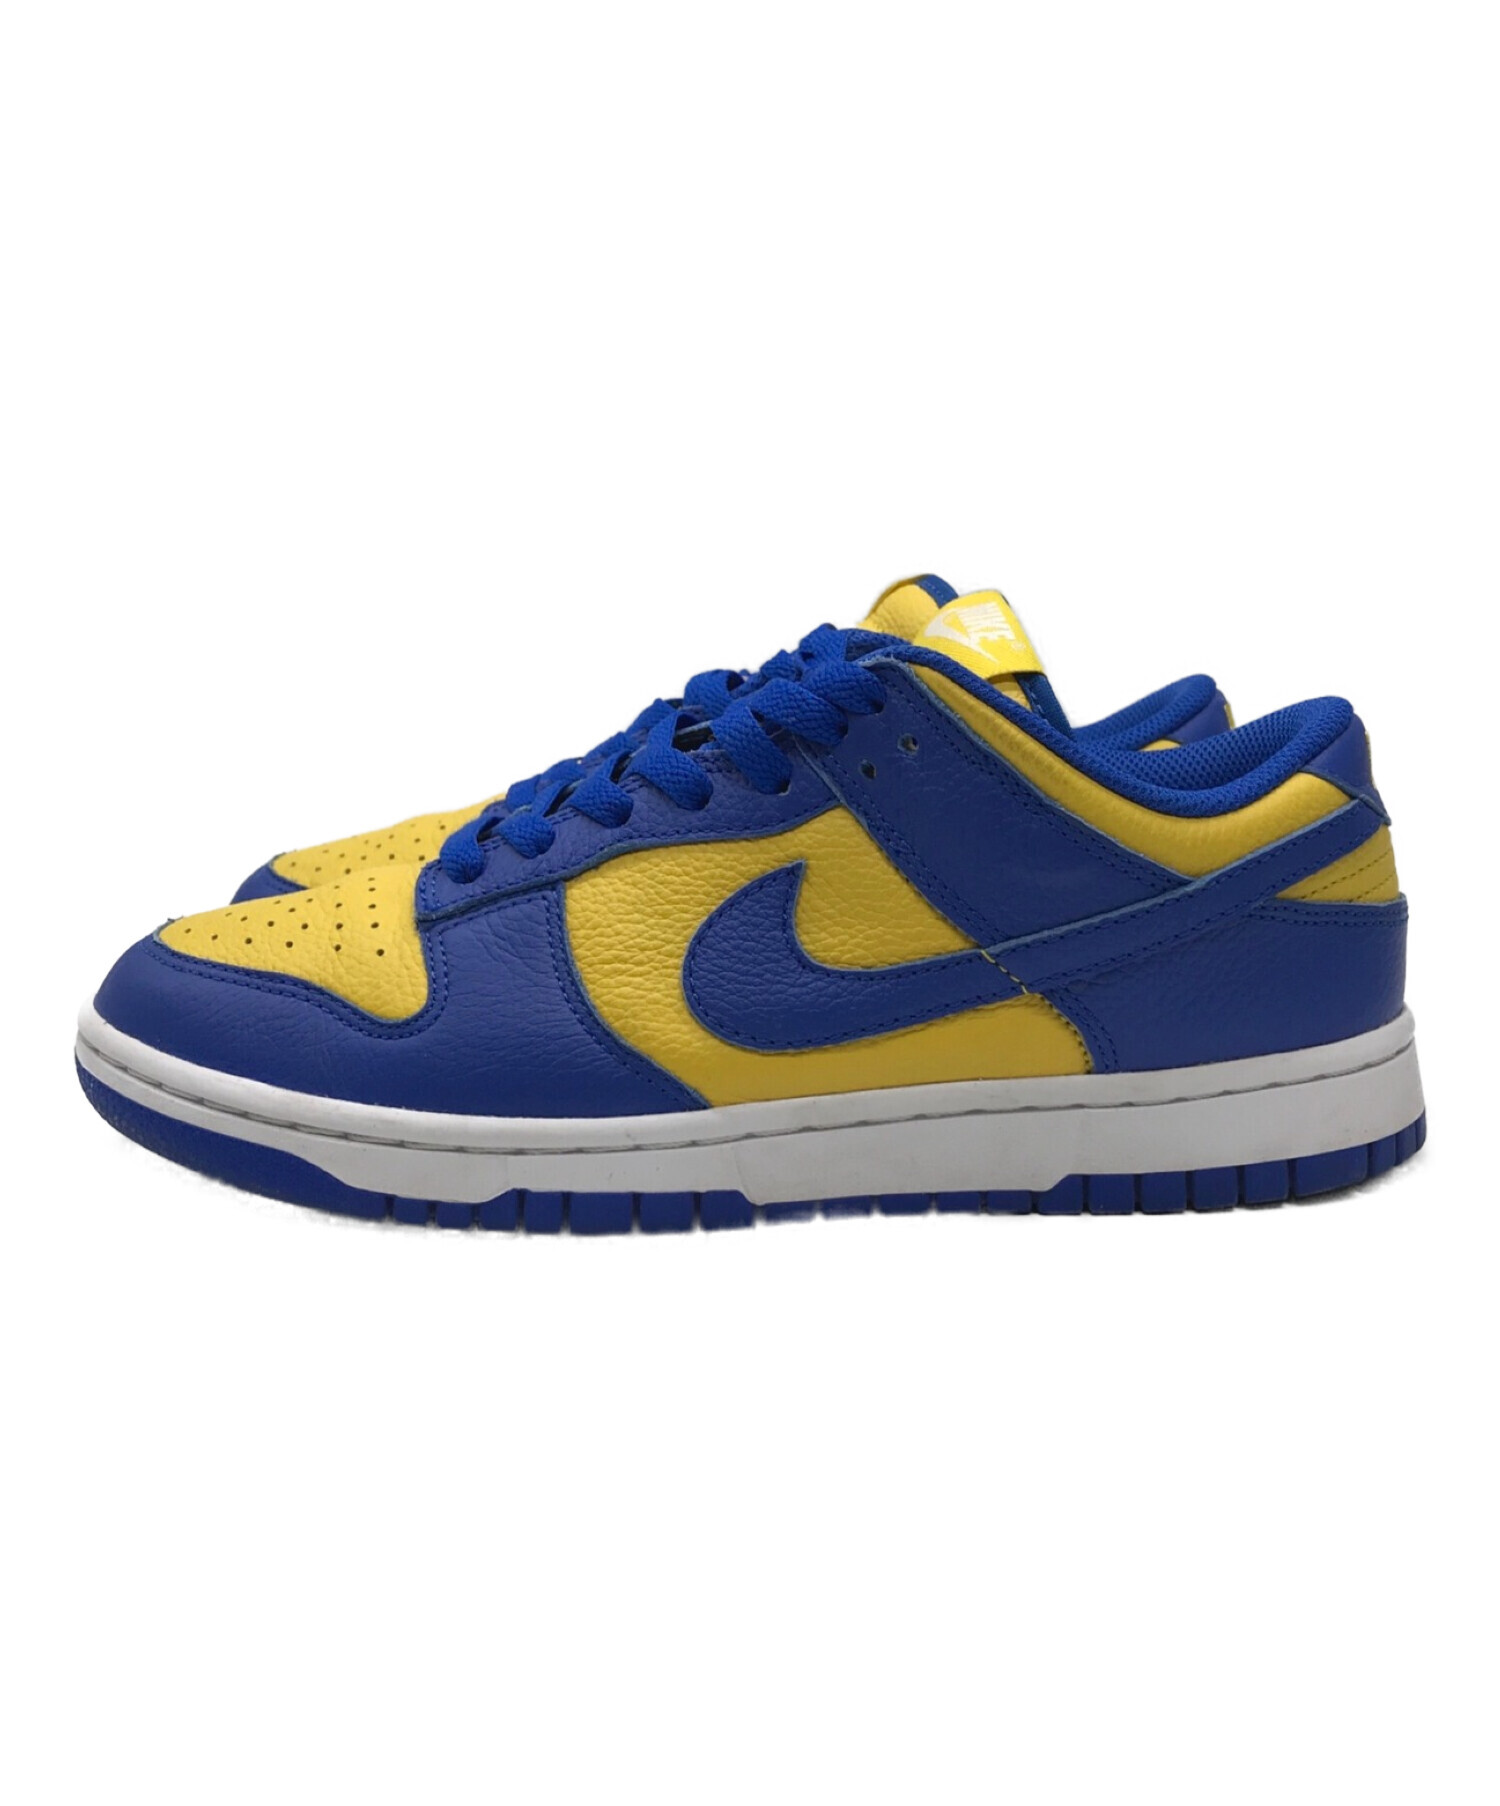 NIKE (ナイキ) DUNK LOW BY YOU イエロー×ブルー サイズ:US7